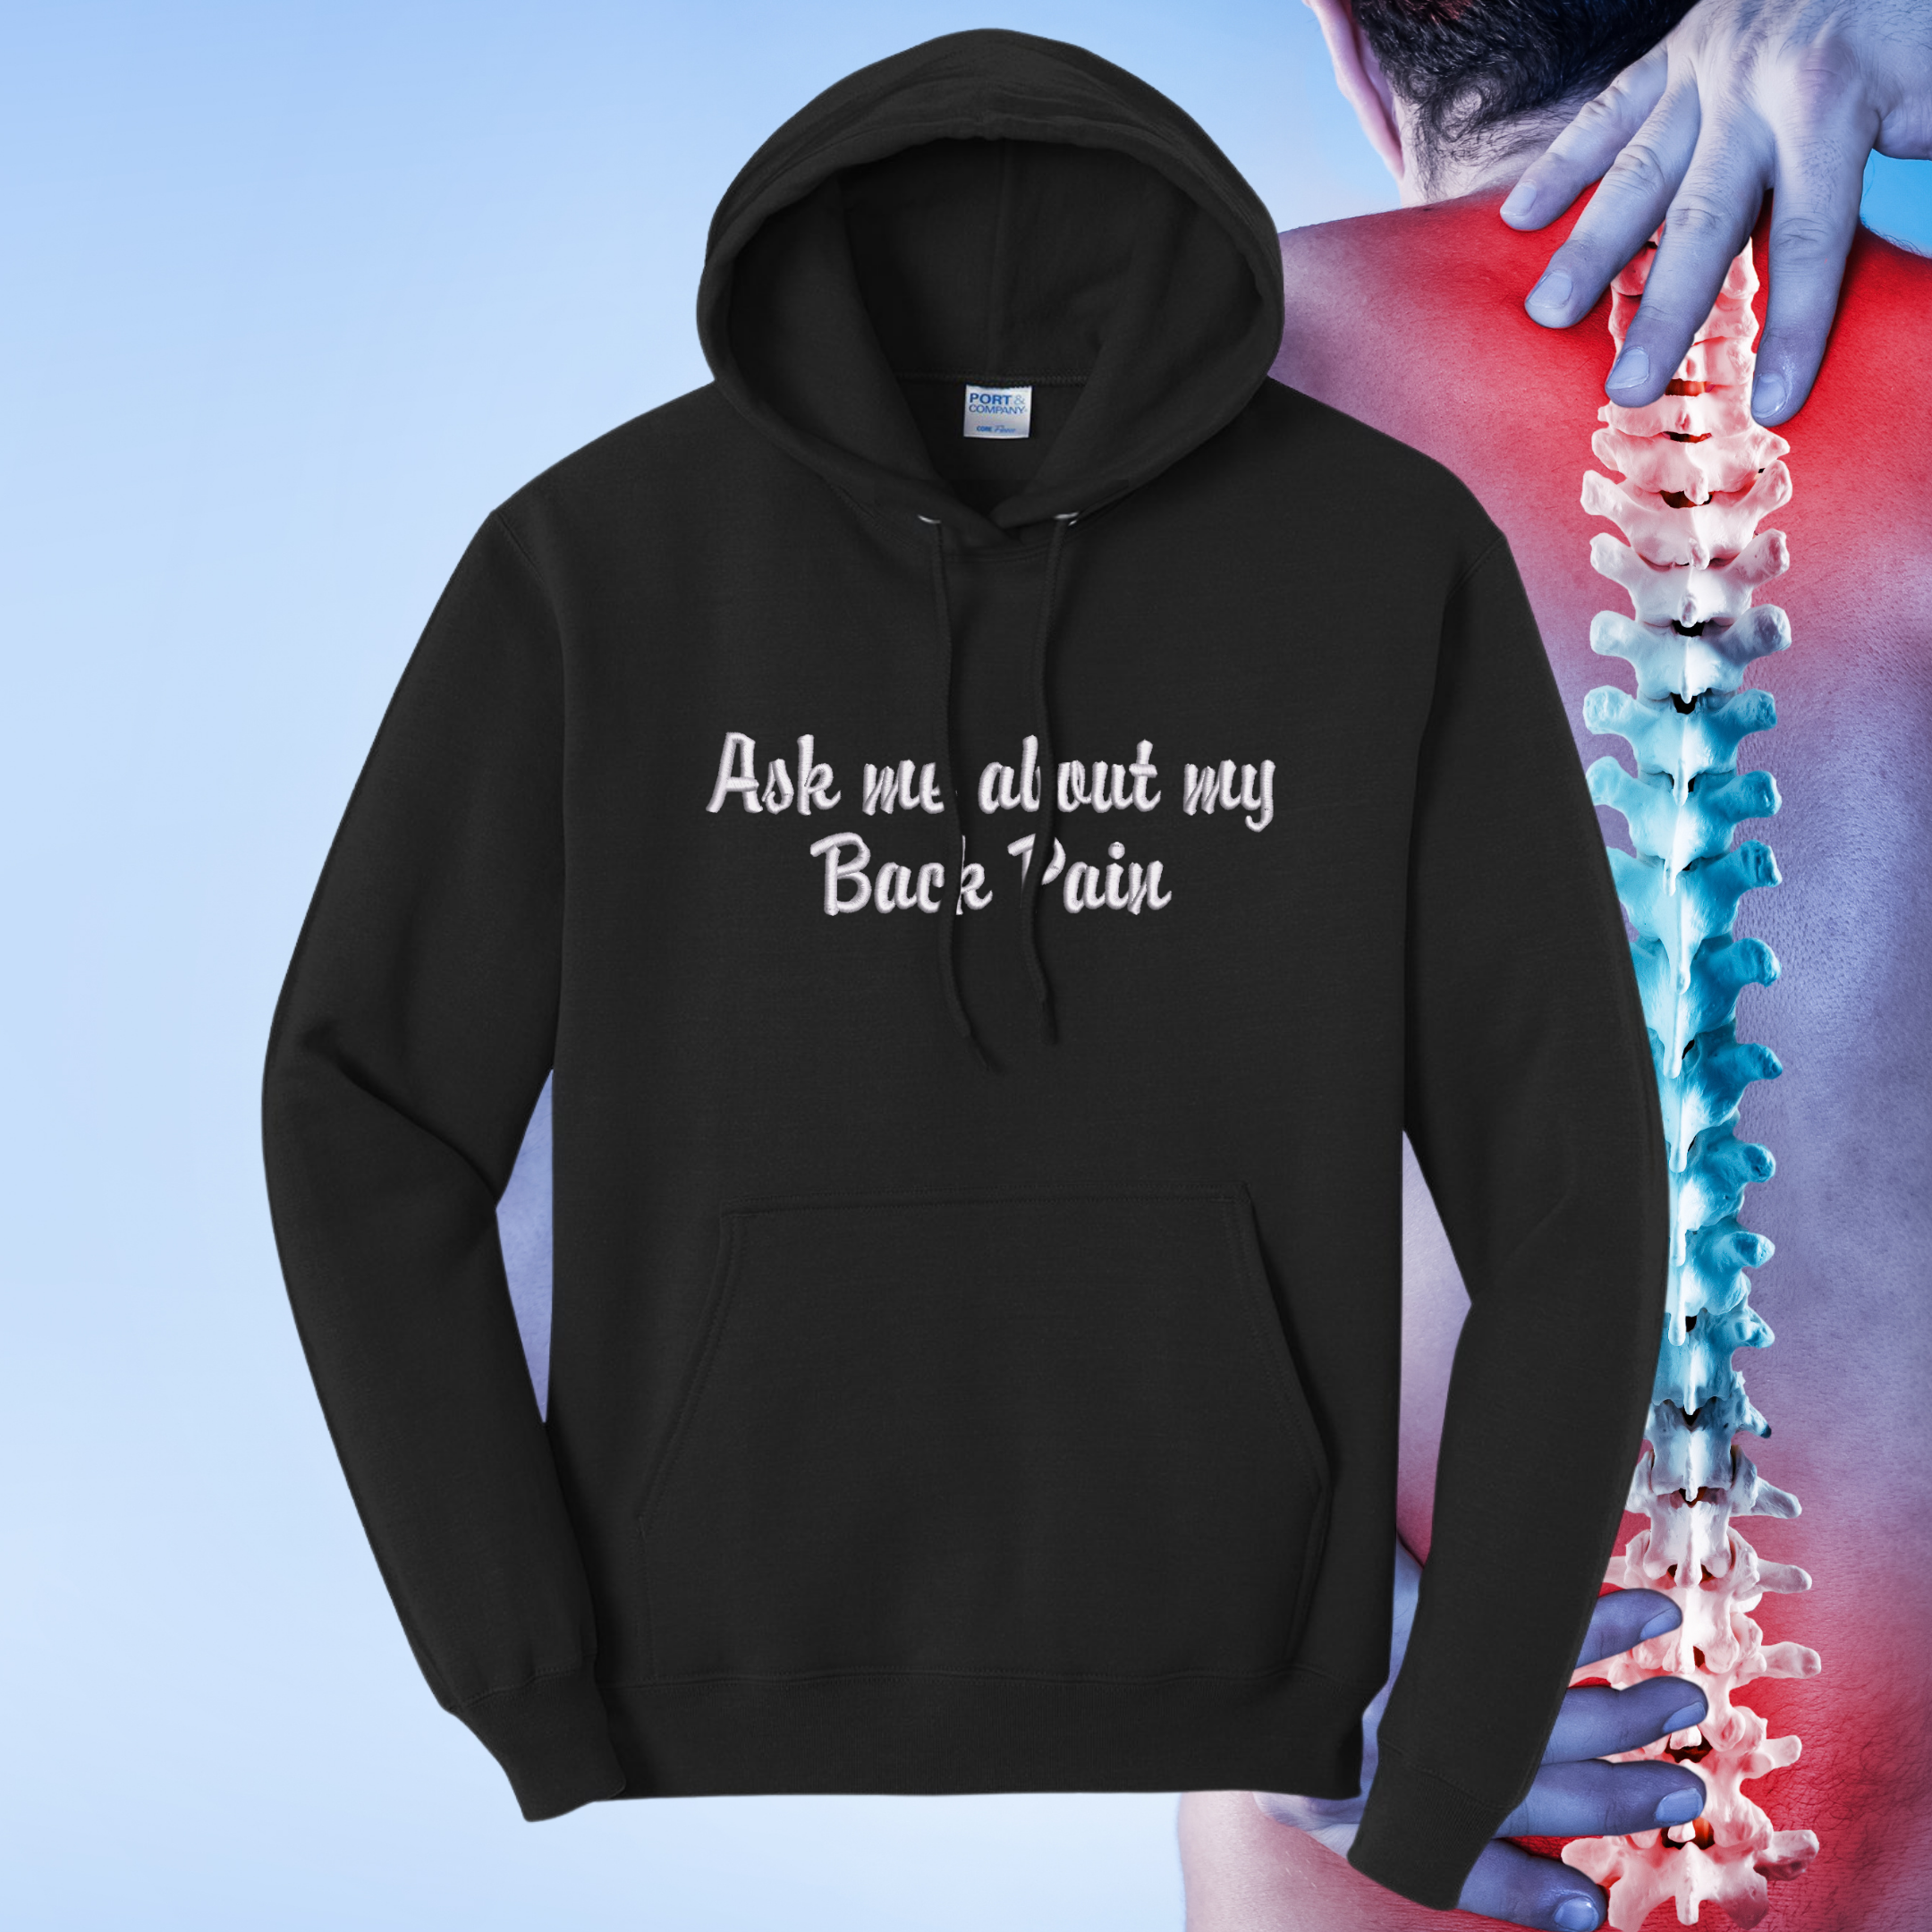 Ask Me About My Back Pain Embroidered Black Hoodie, Unisex